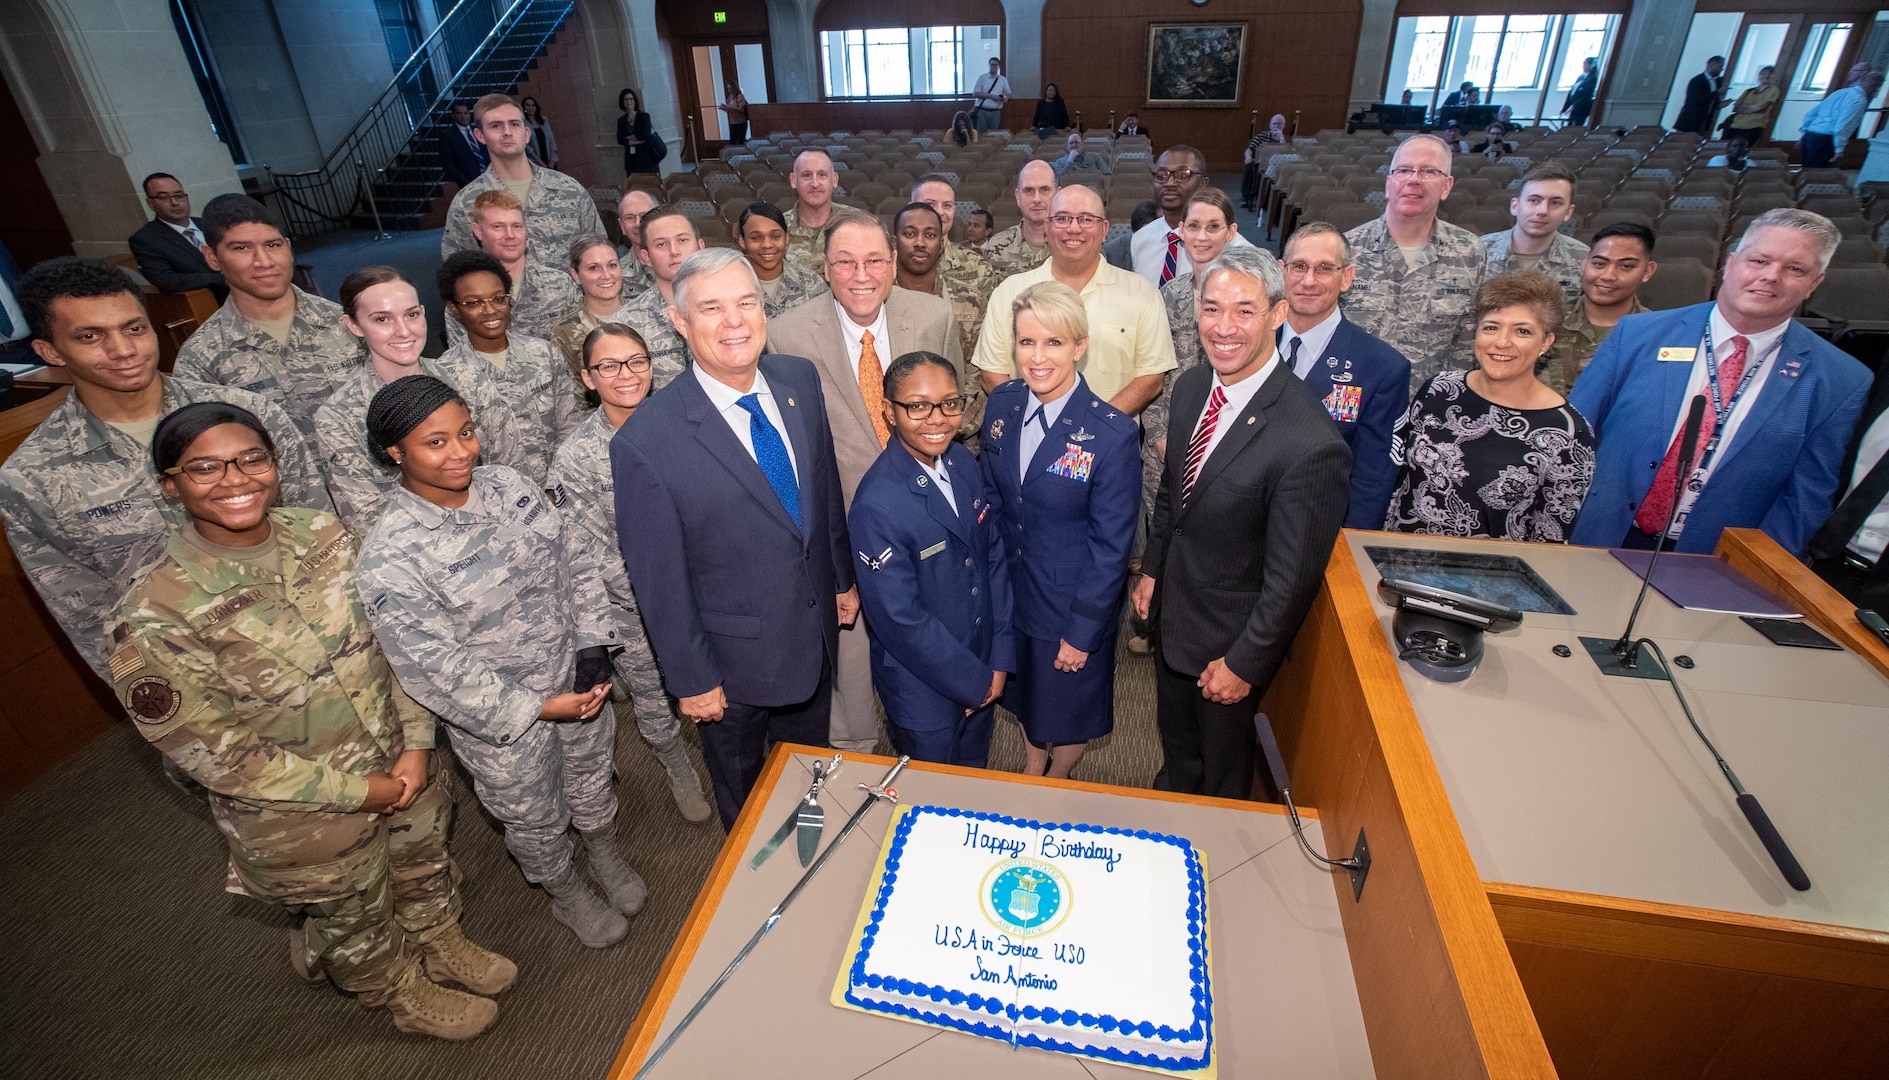 The San Antonio City Council helps celebrate the Air Force’s 72nd Birthday with the 502nd Air Base Wing and Joint Base San Antonio at City Hall Sept. 12.